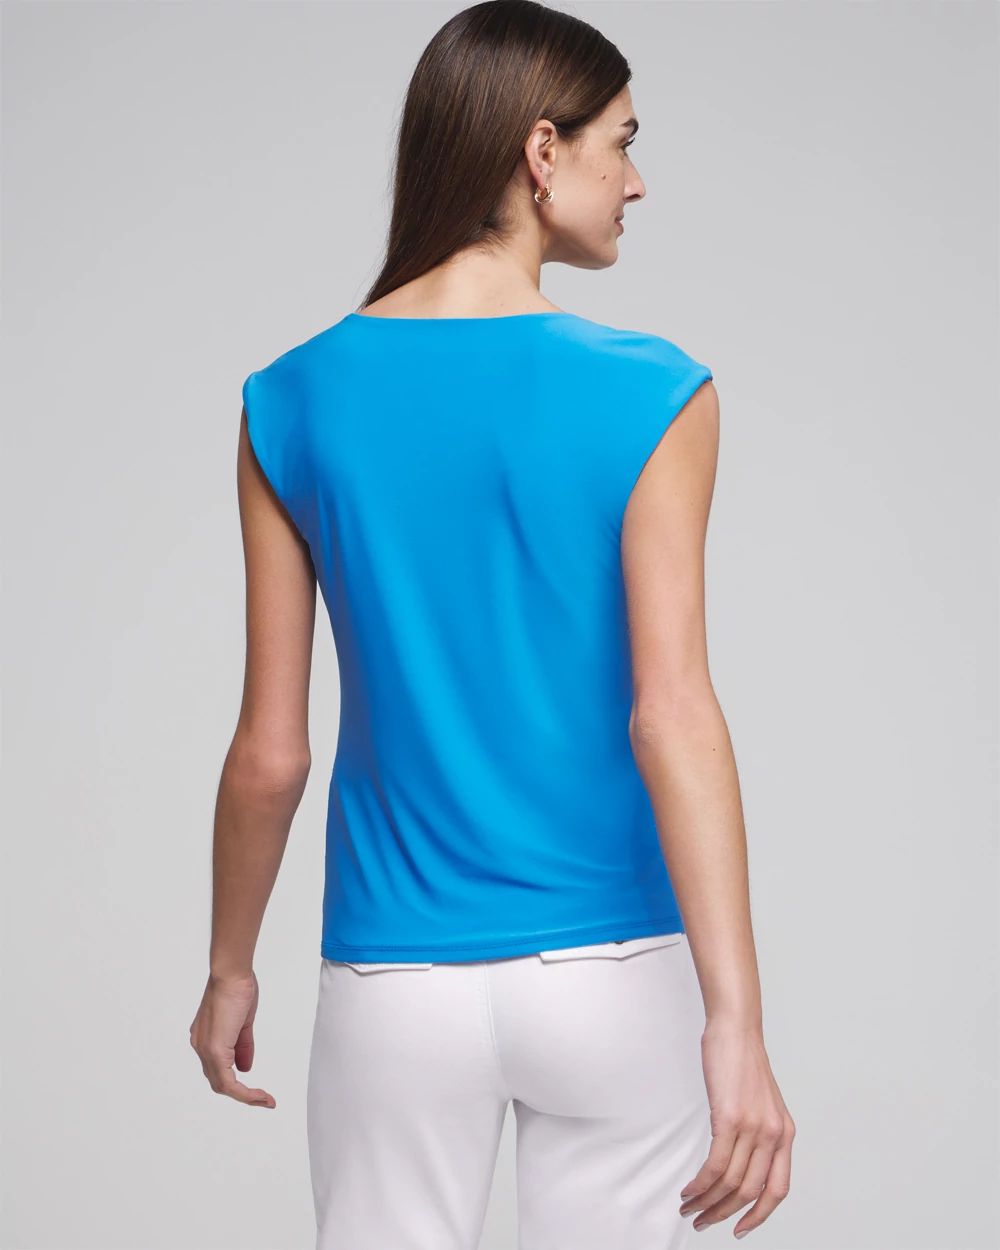 Outlet WHBM Cap Sleeve Top click to view larger image.